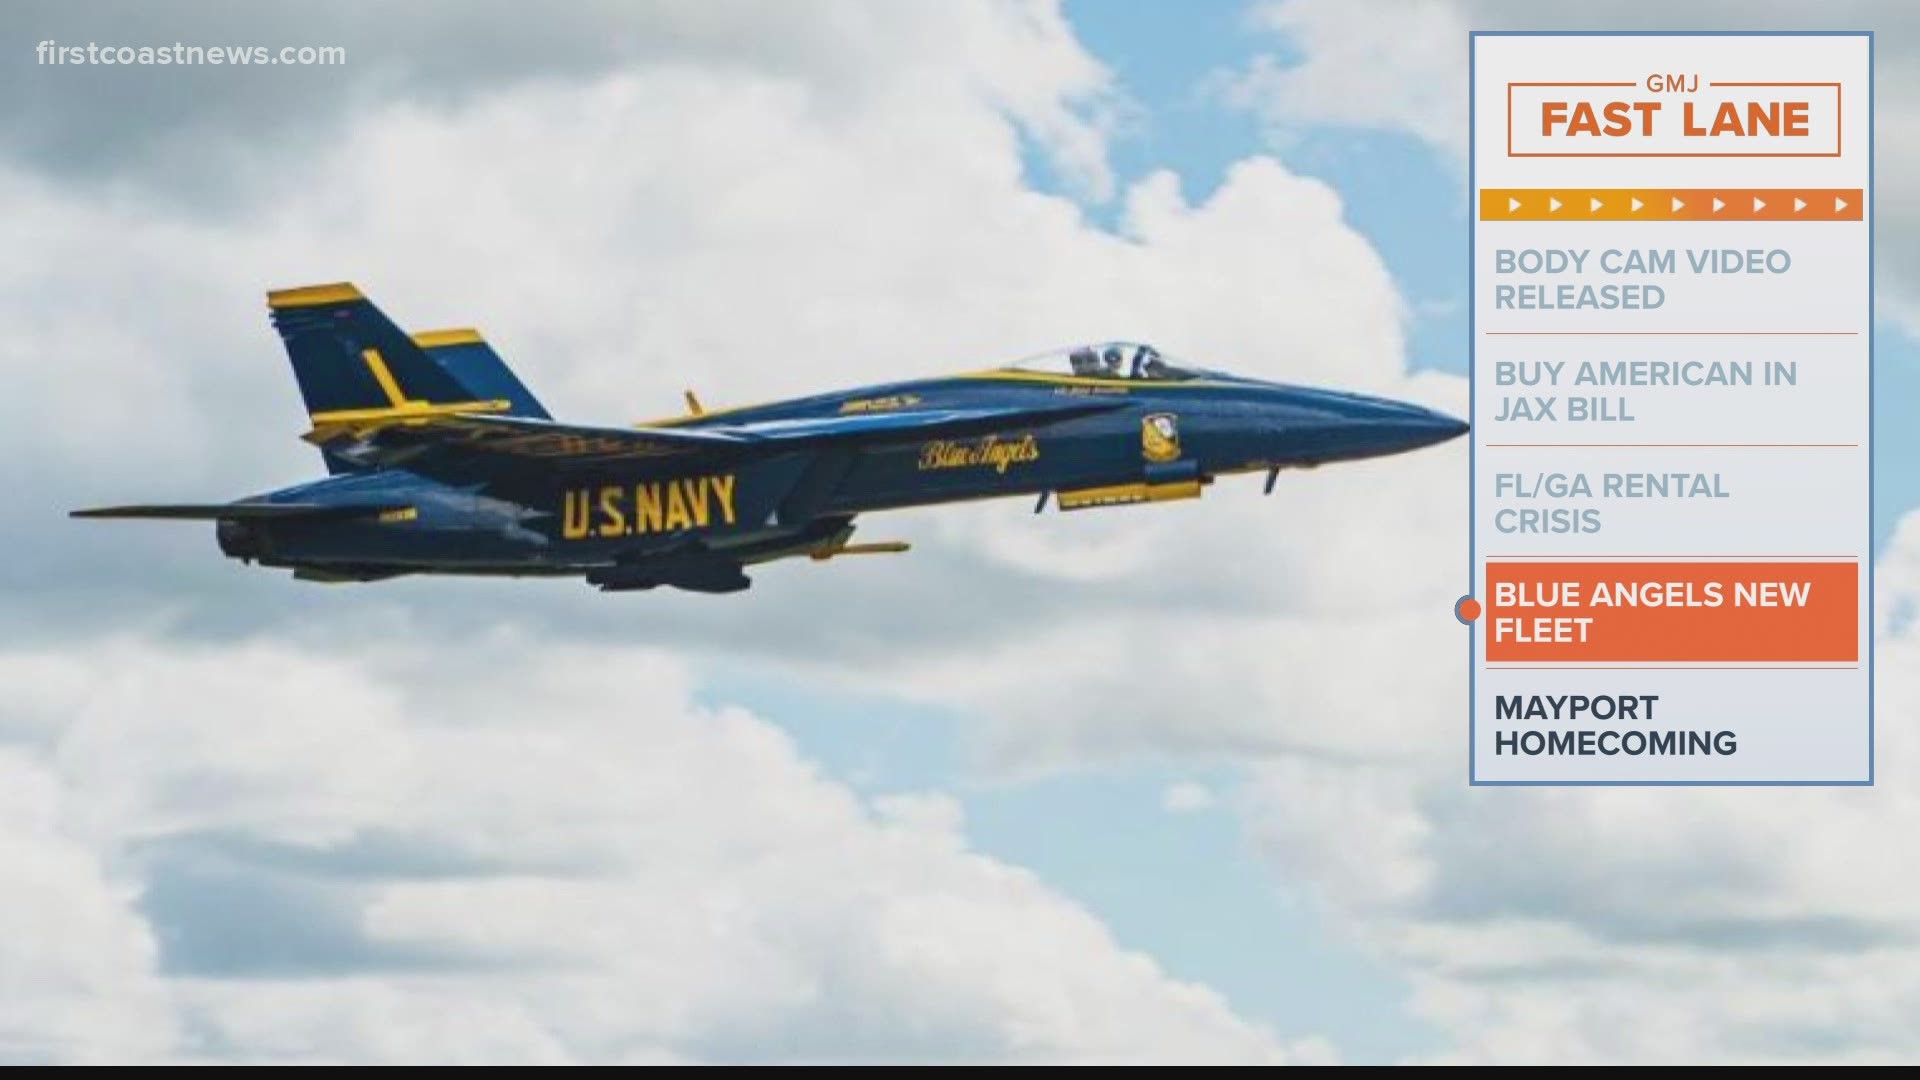 "Jacksonville is proud to be the birthplace of the Blue Angels and proud to help contribute to their future success," said the City of Jacksonville.